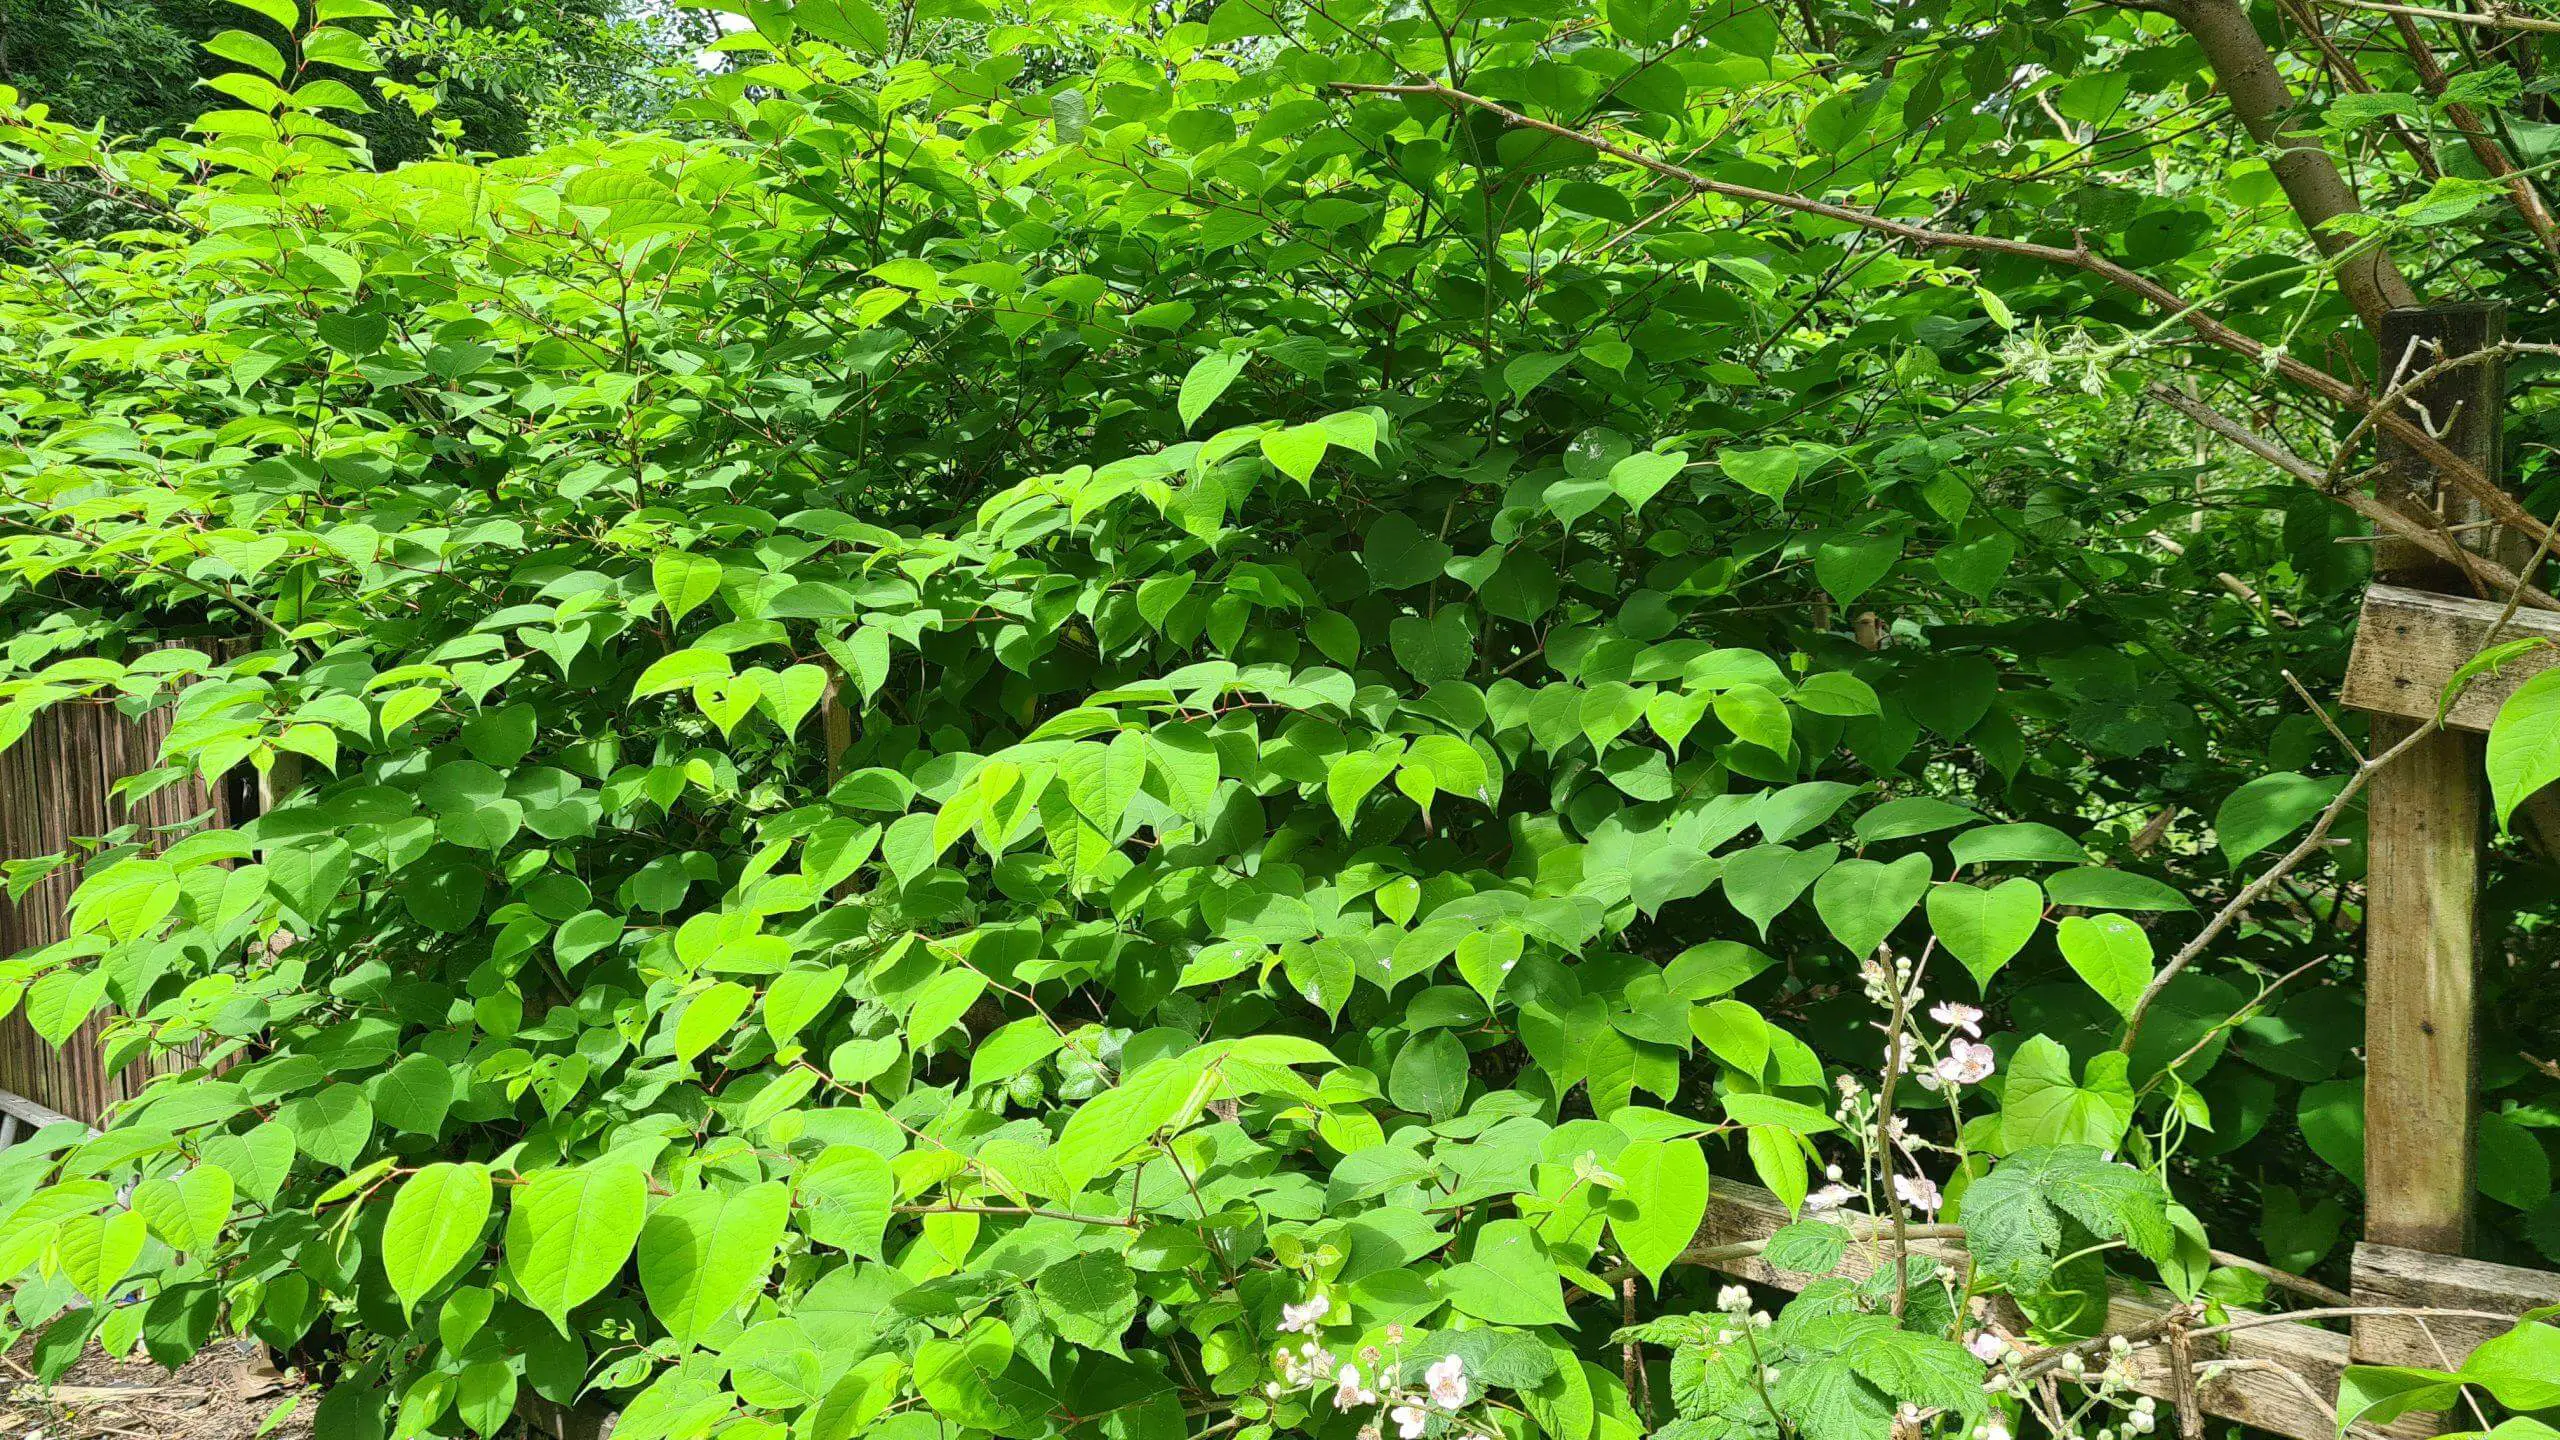 Japanese Knotweed is by far the biggest offender when it comes to invasive weeds aggressive and consuming